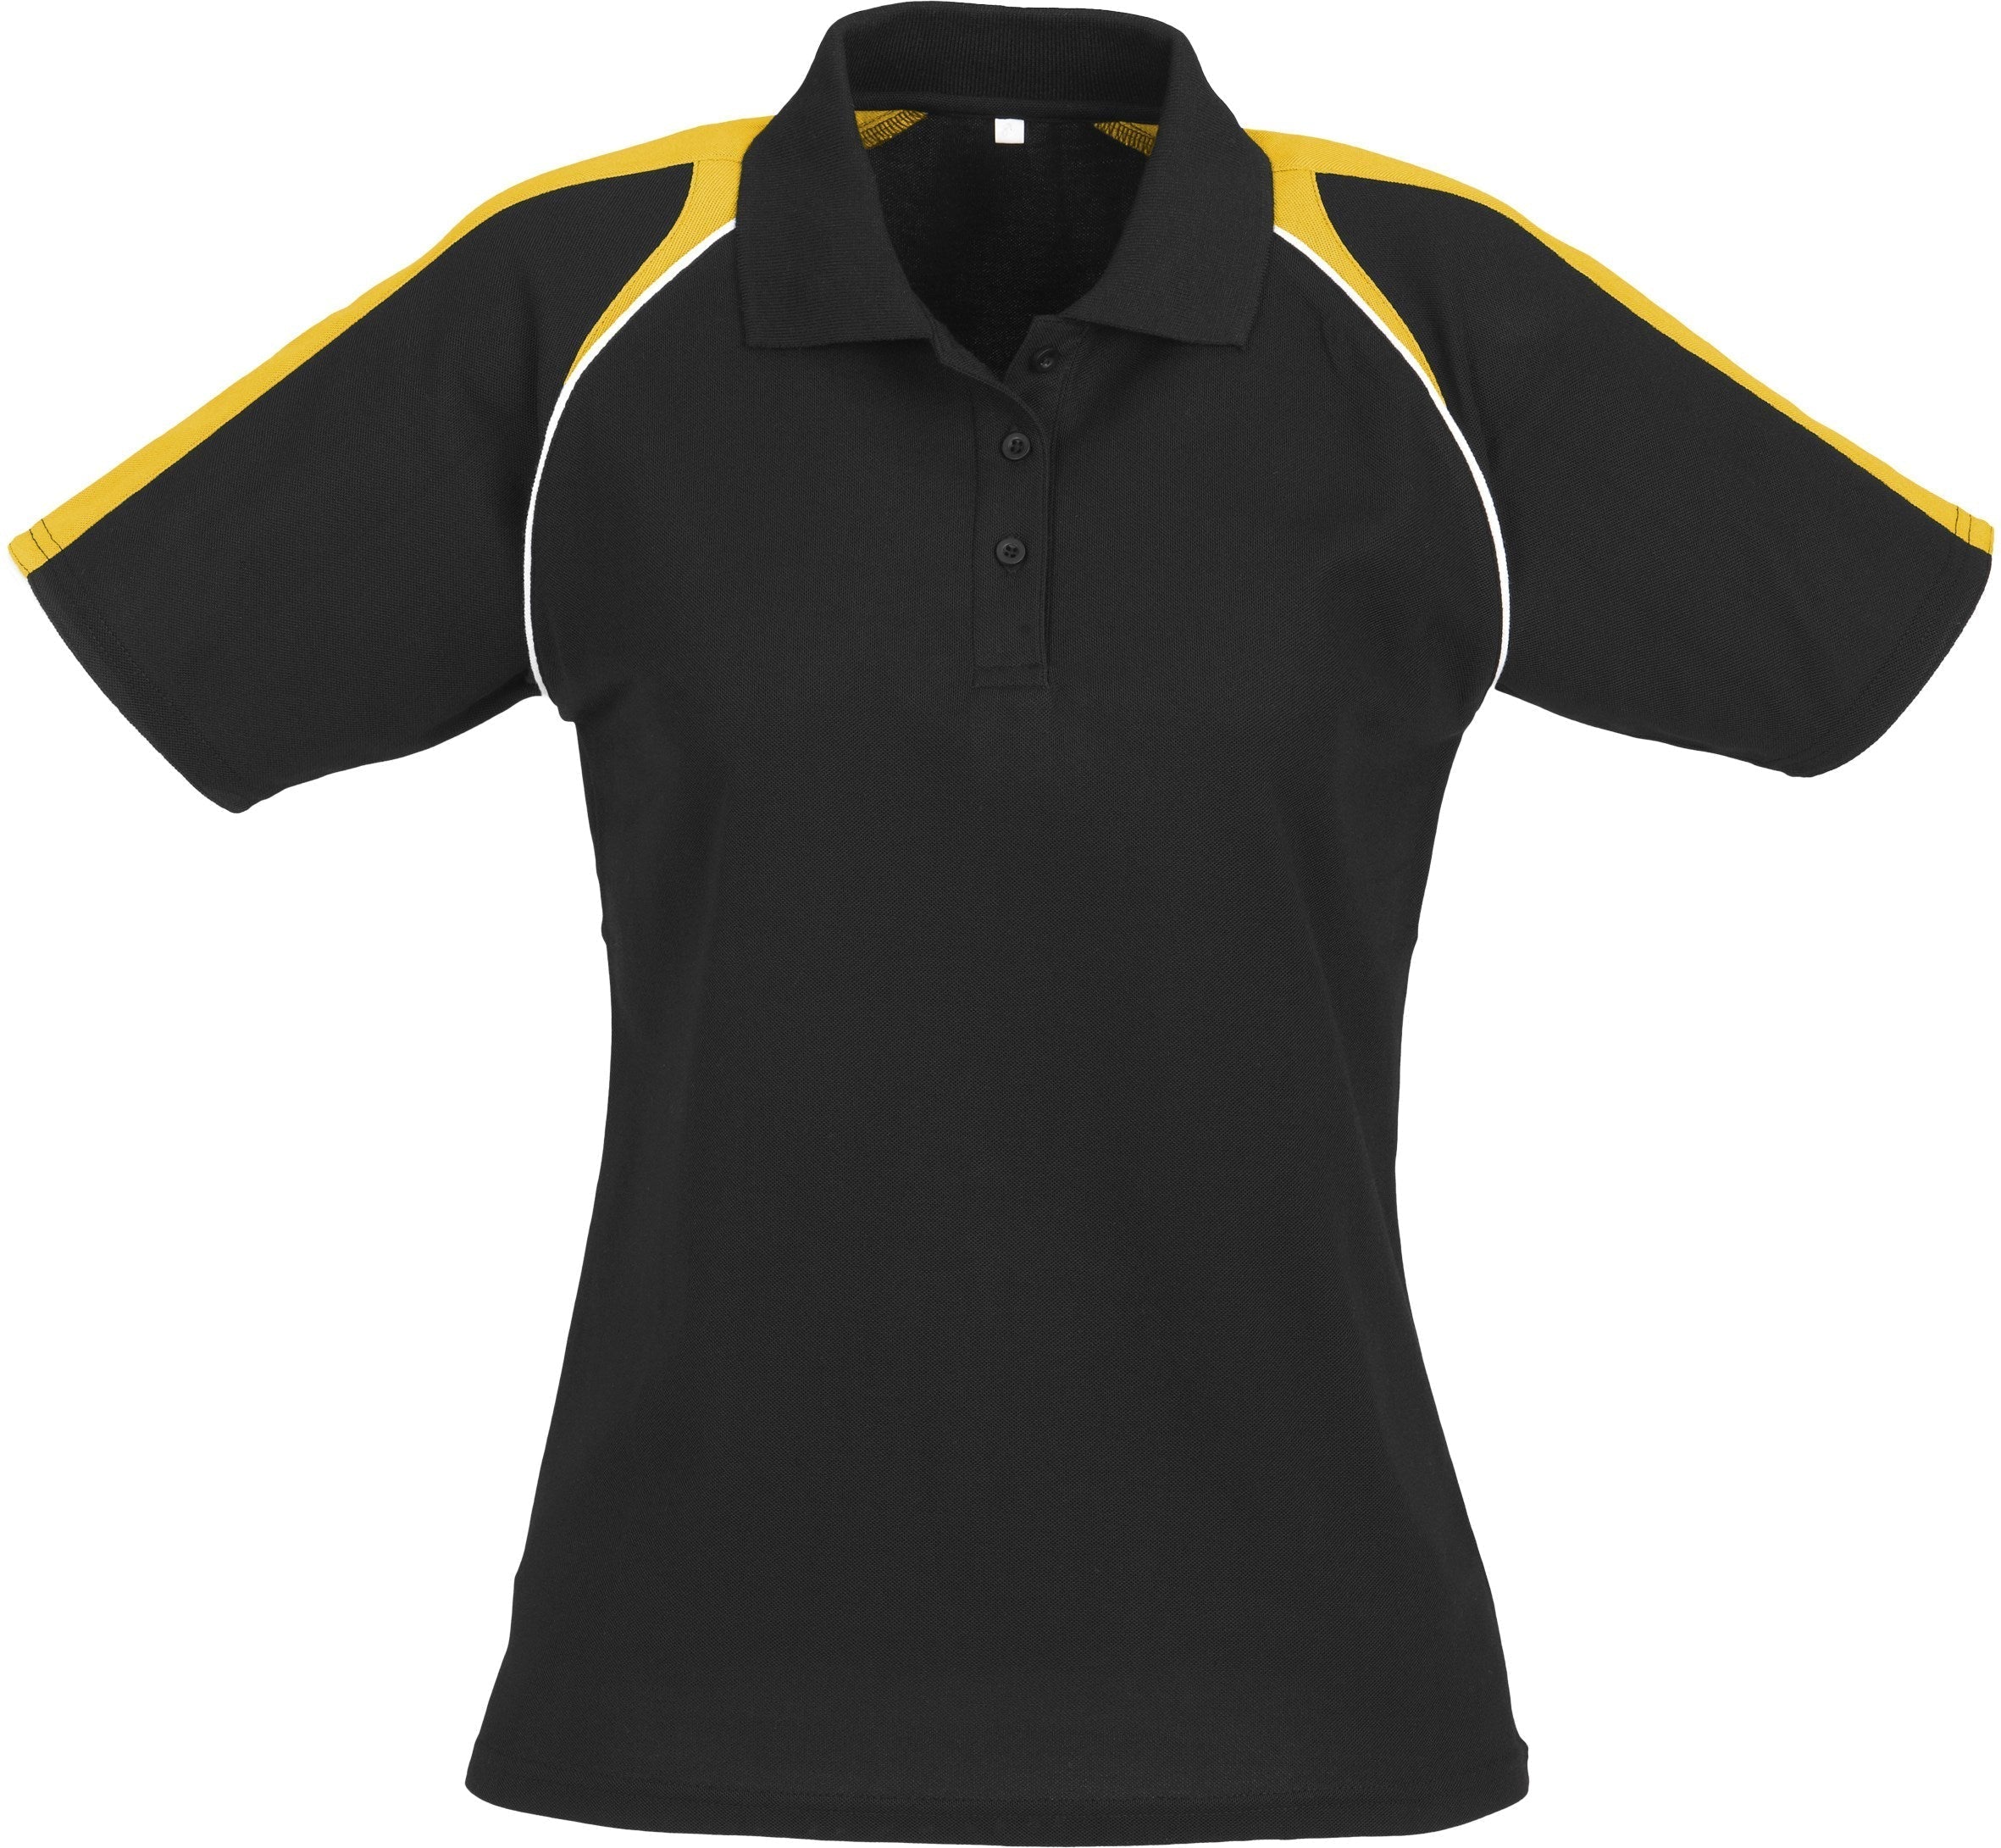 Ladies Triton Golf Shirt - Black Yellow Only-L-Black With Yellow-BLY